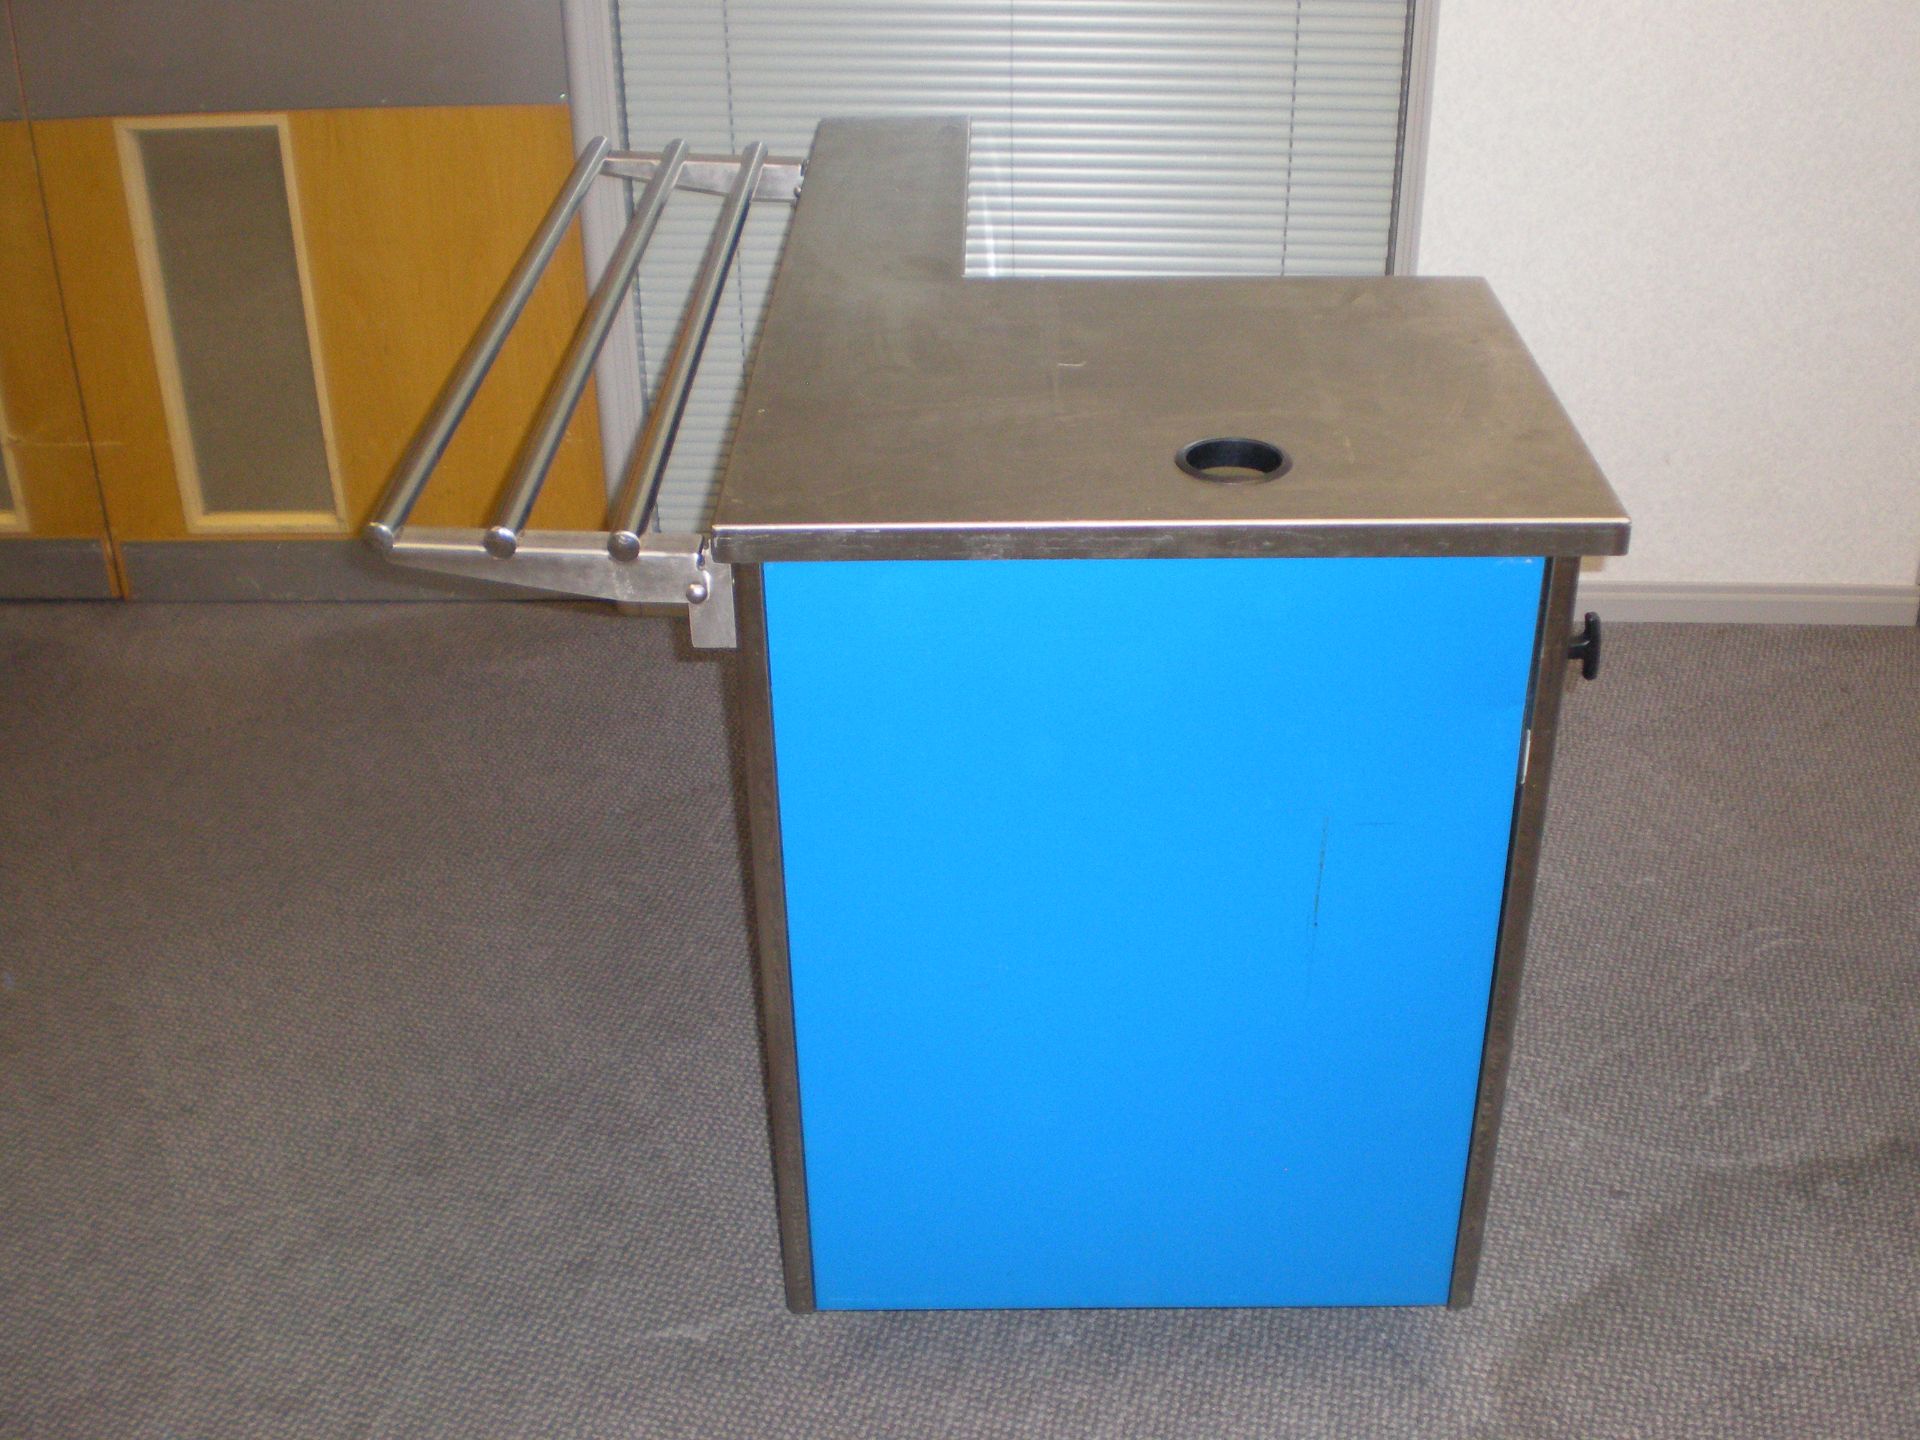 Canteen Stainless Steel Trolly Pay Station For Till, On Wheels, Collapsable Shelf For Trays, 2 - Image 8 of 12